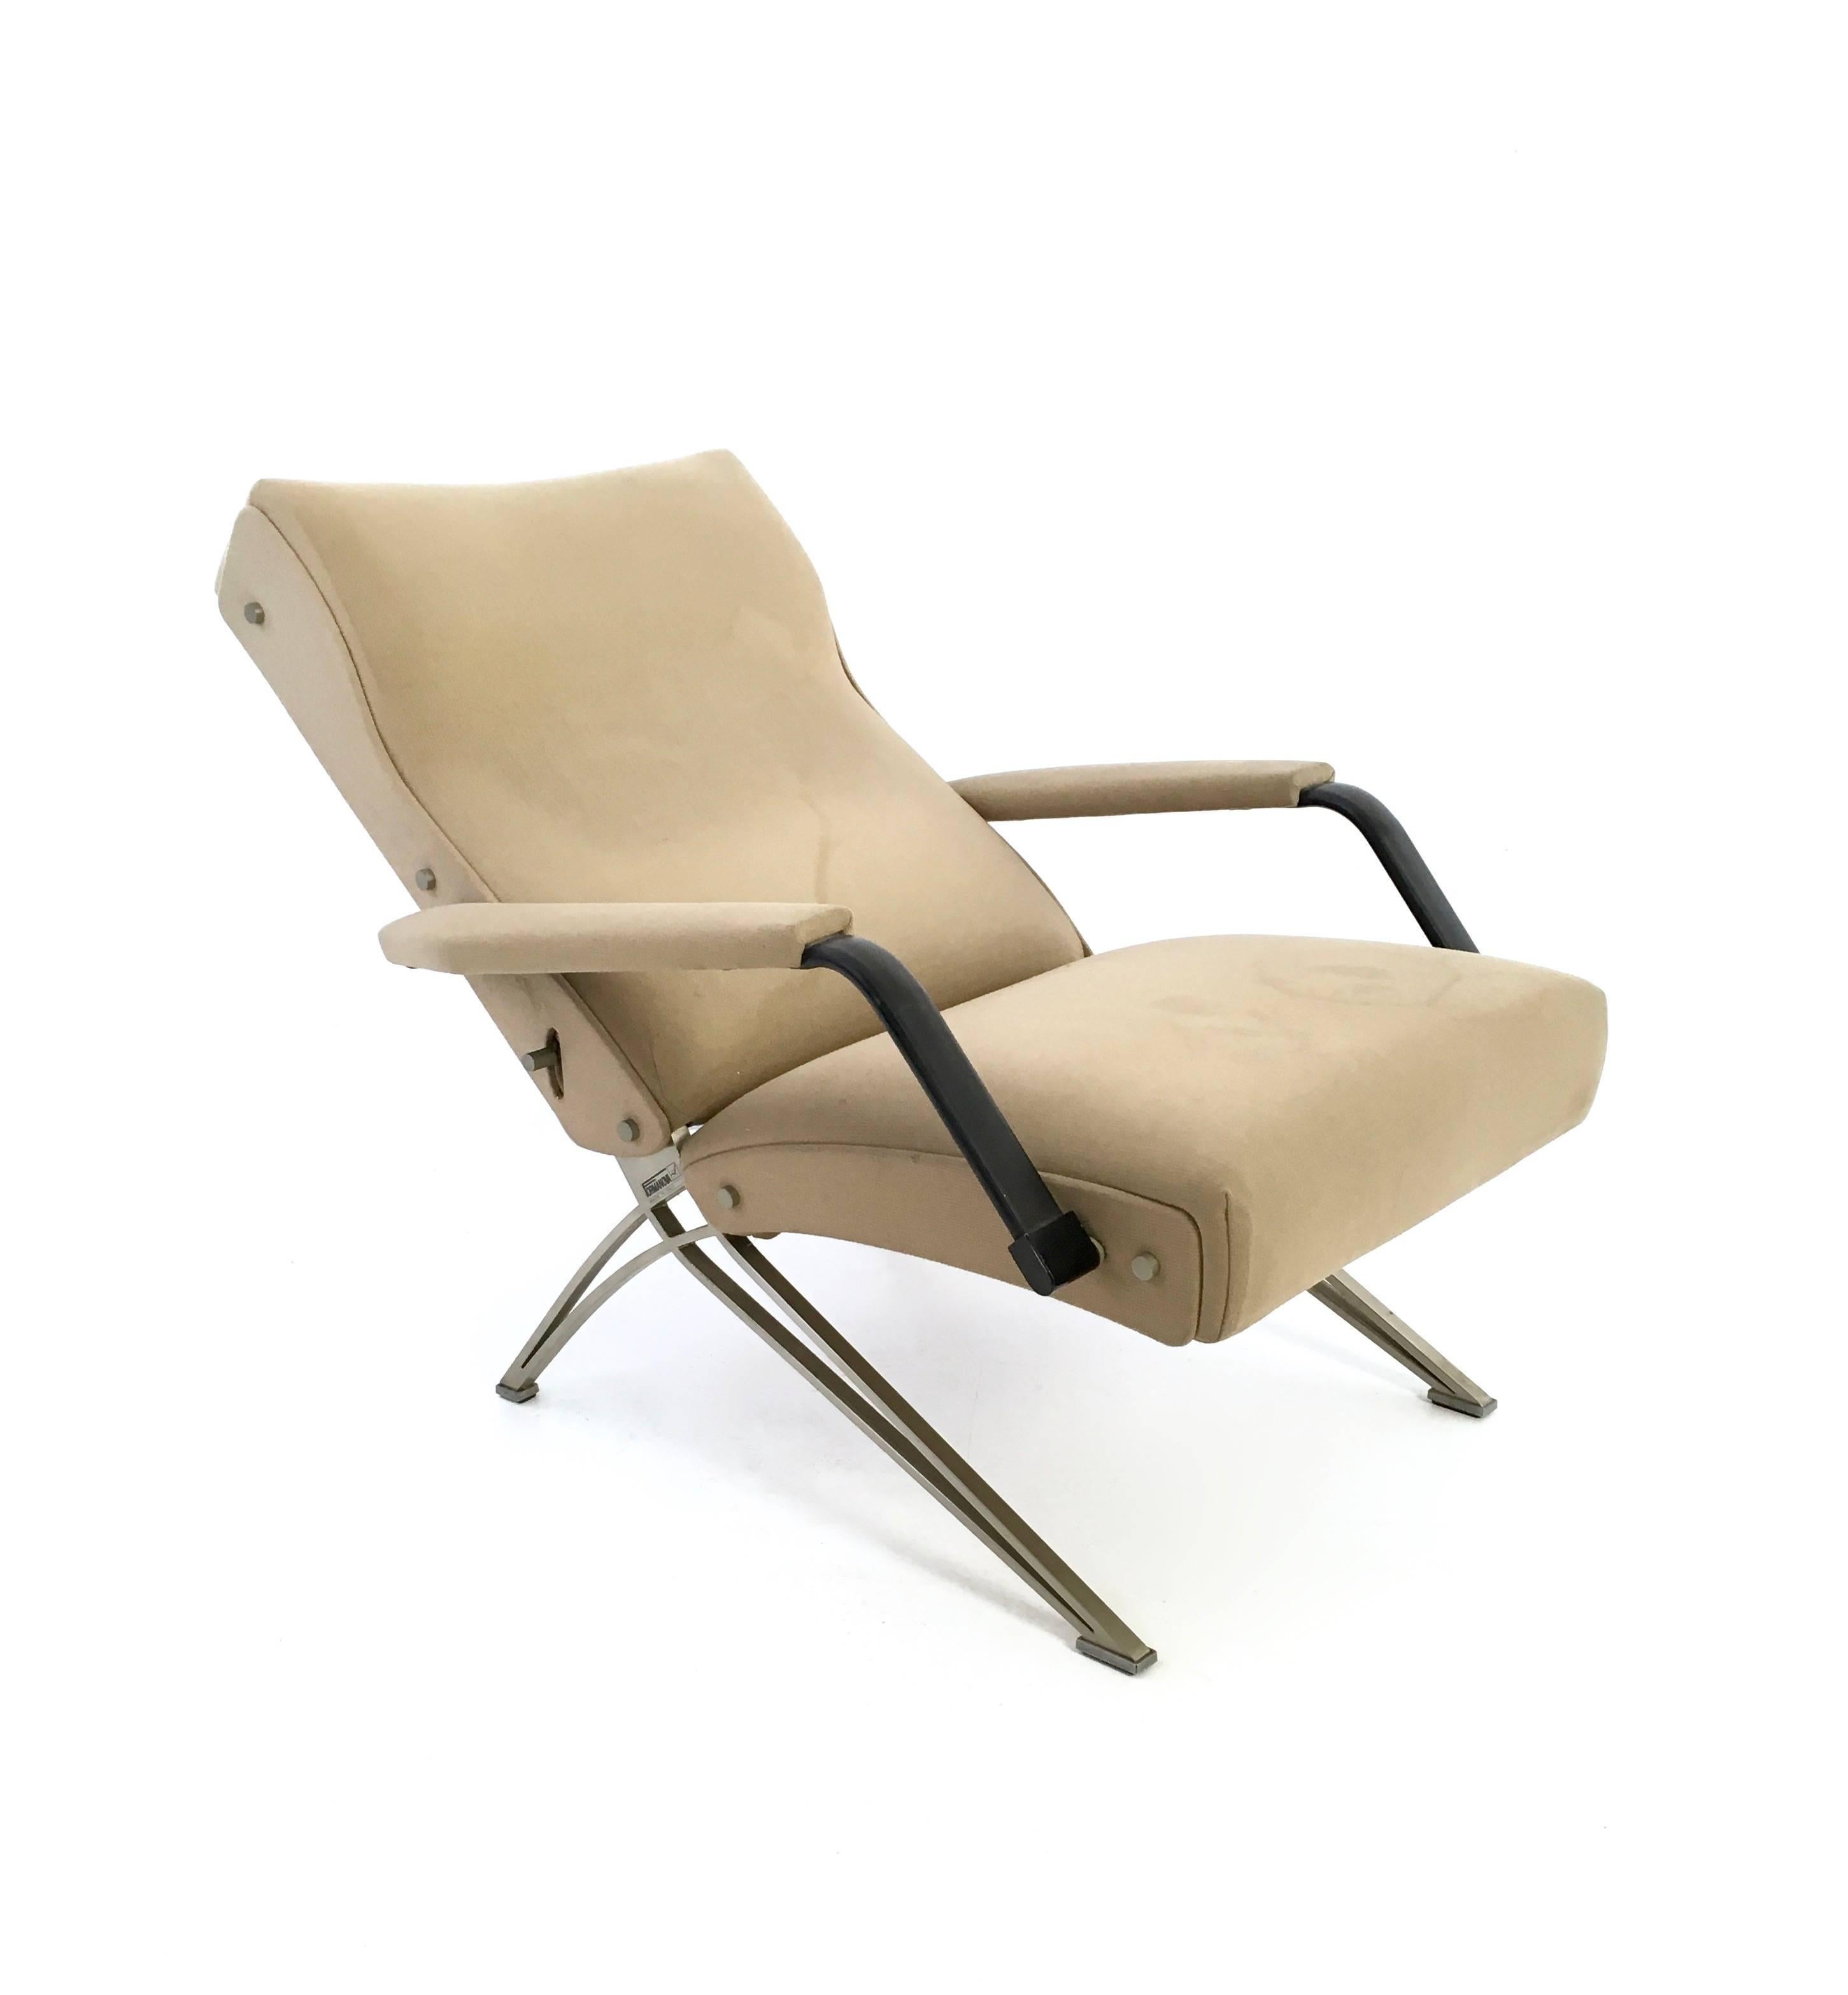 This armchair was designed by Giulio Moscatelli for Formanova and manufactured in Italy. It is made in chromed metal, foam padding and fabric. In fair original condition: its mechanic works perfectly but the fabric has few stains. It features its